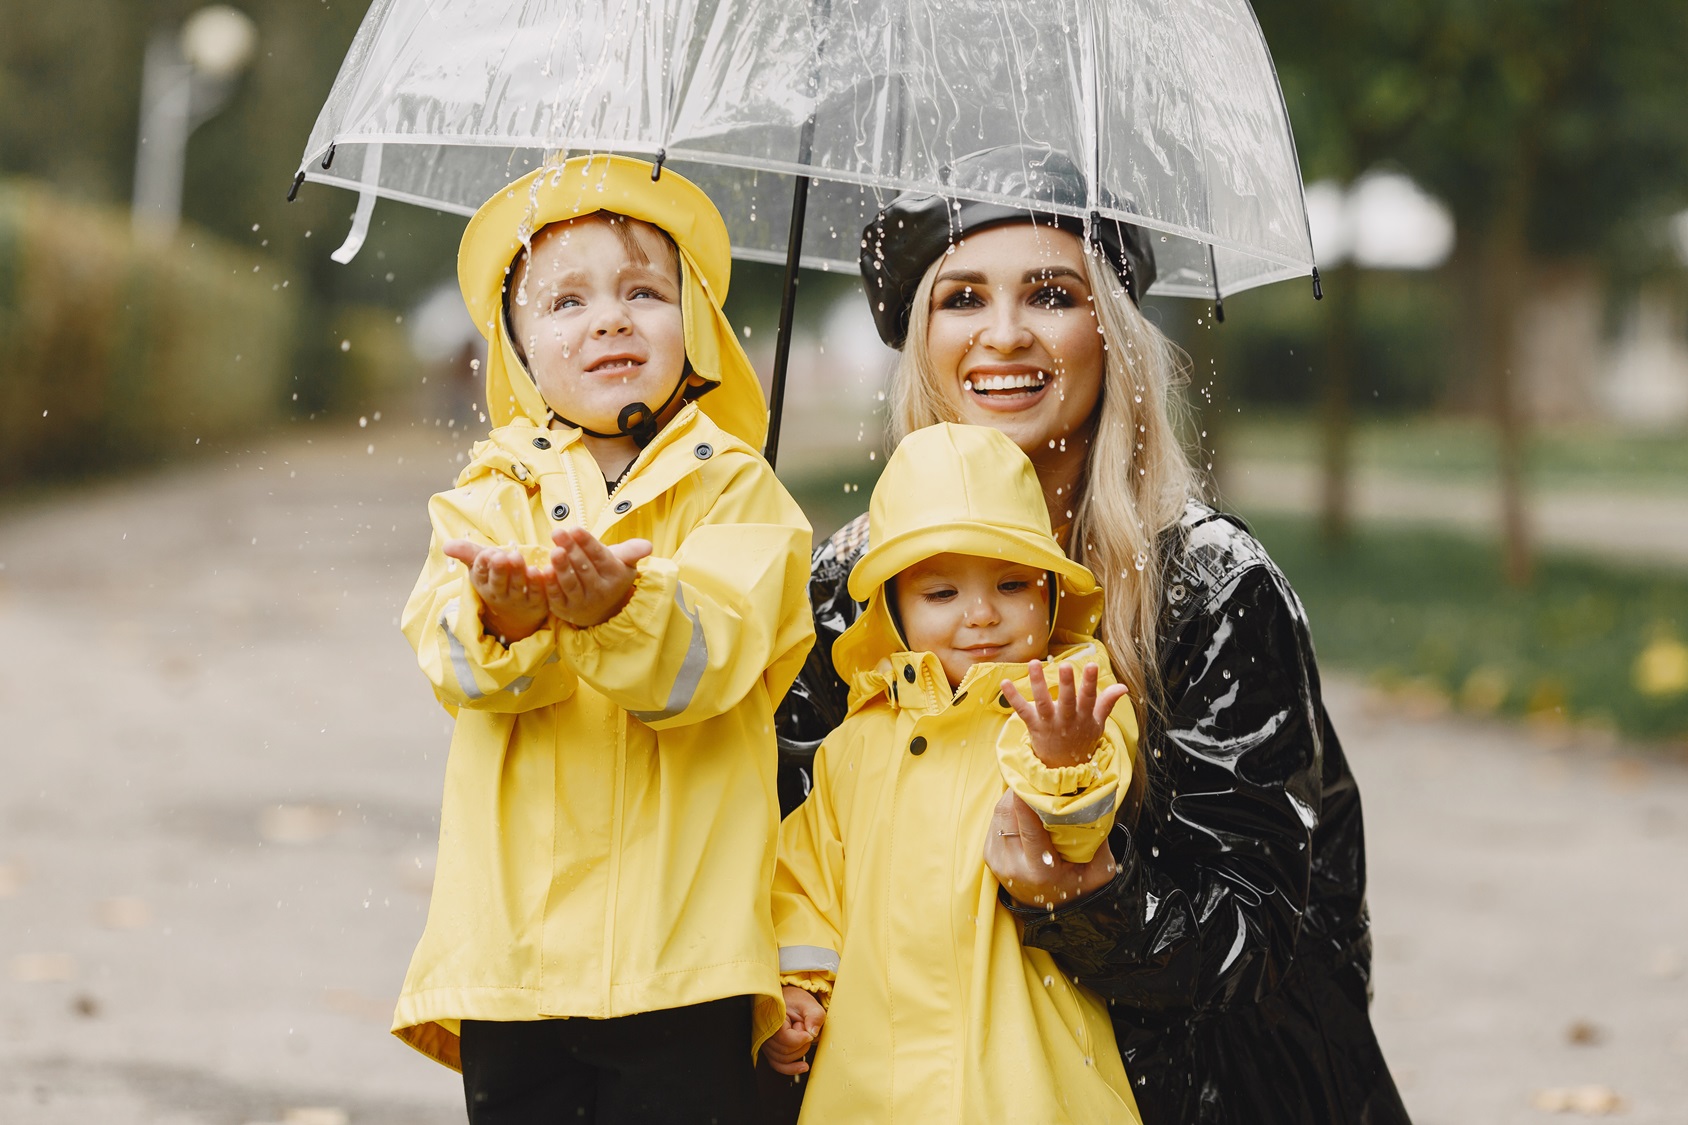 family-in-a-rainy-park-kids-in-a-yellow-raincoats-and-woman-in-a-black-coat